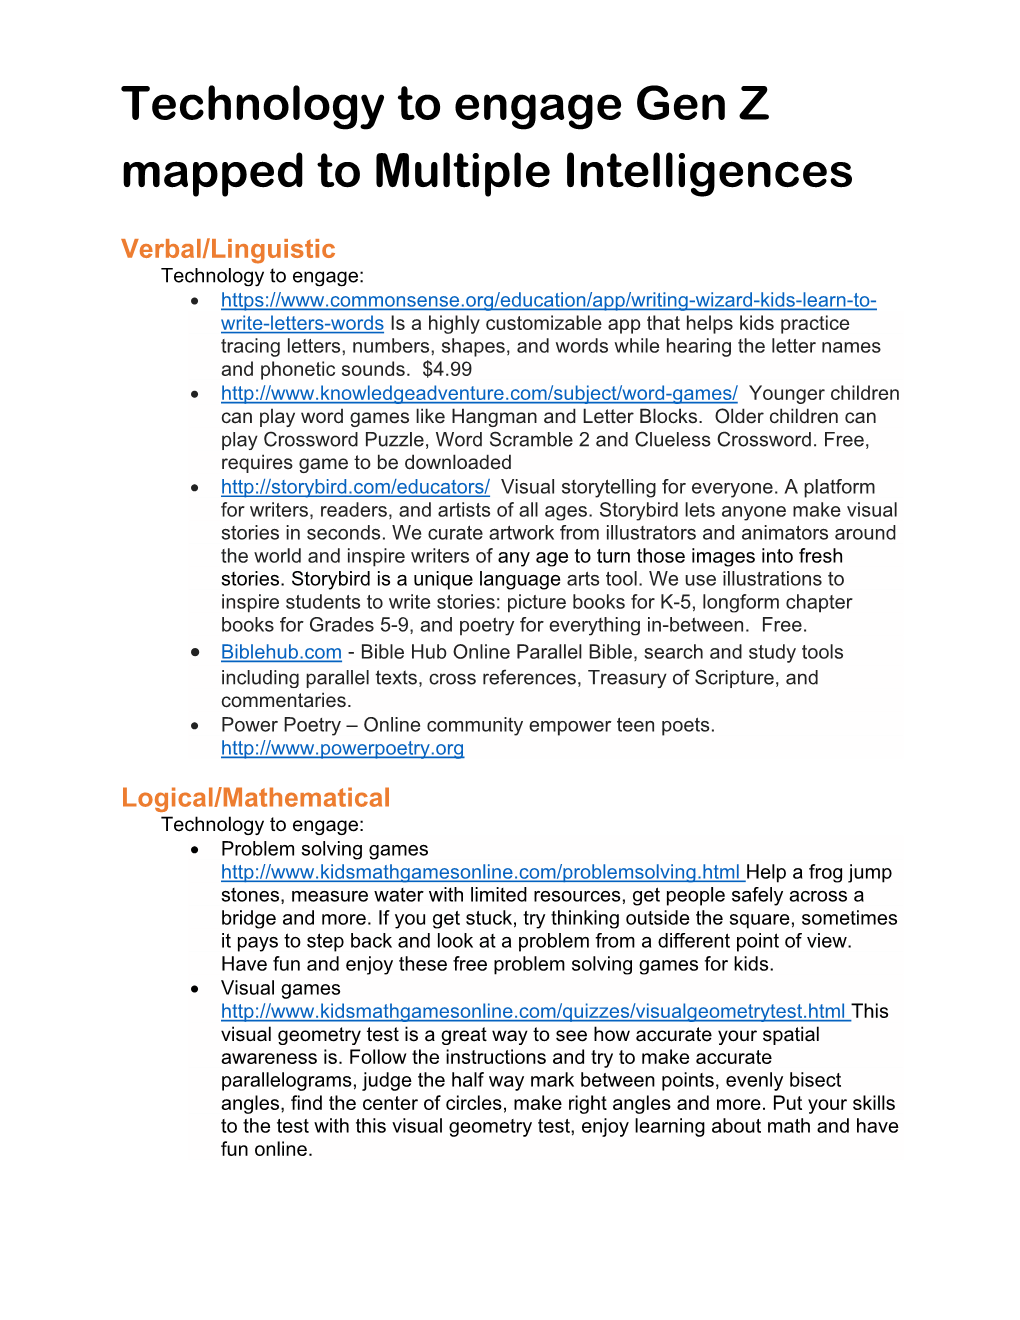 Technology to Engage Gen Z Mapped to Multiple Intelligences